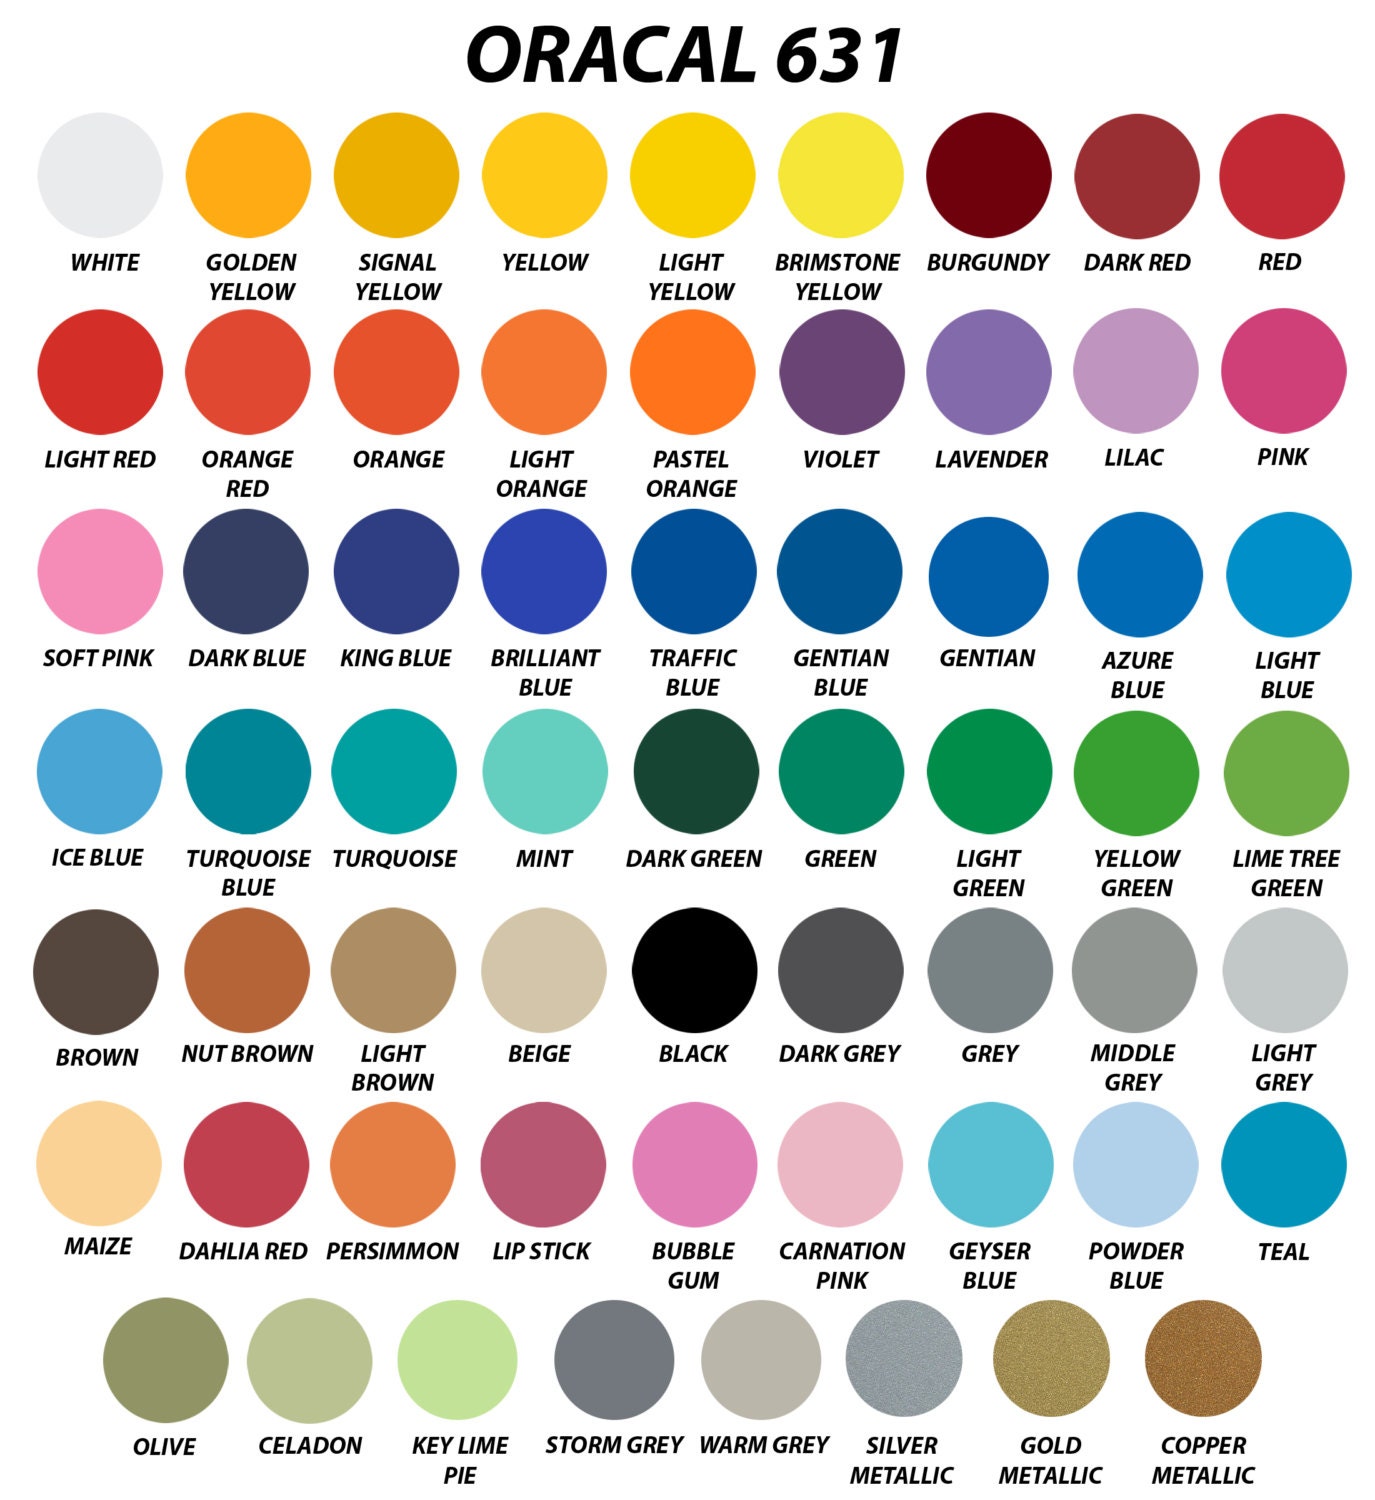 12x 24 / 5-sheets Oracal 631 Matte Wall Vinyl by OneSourceStore